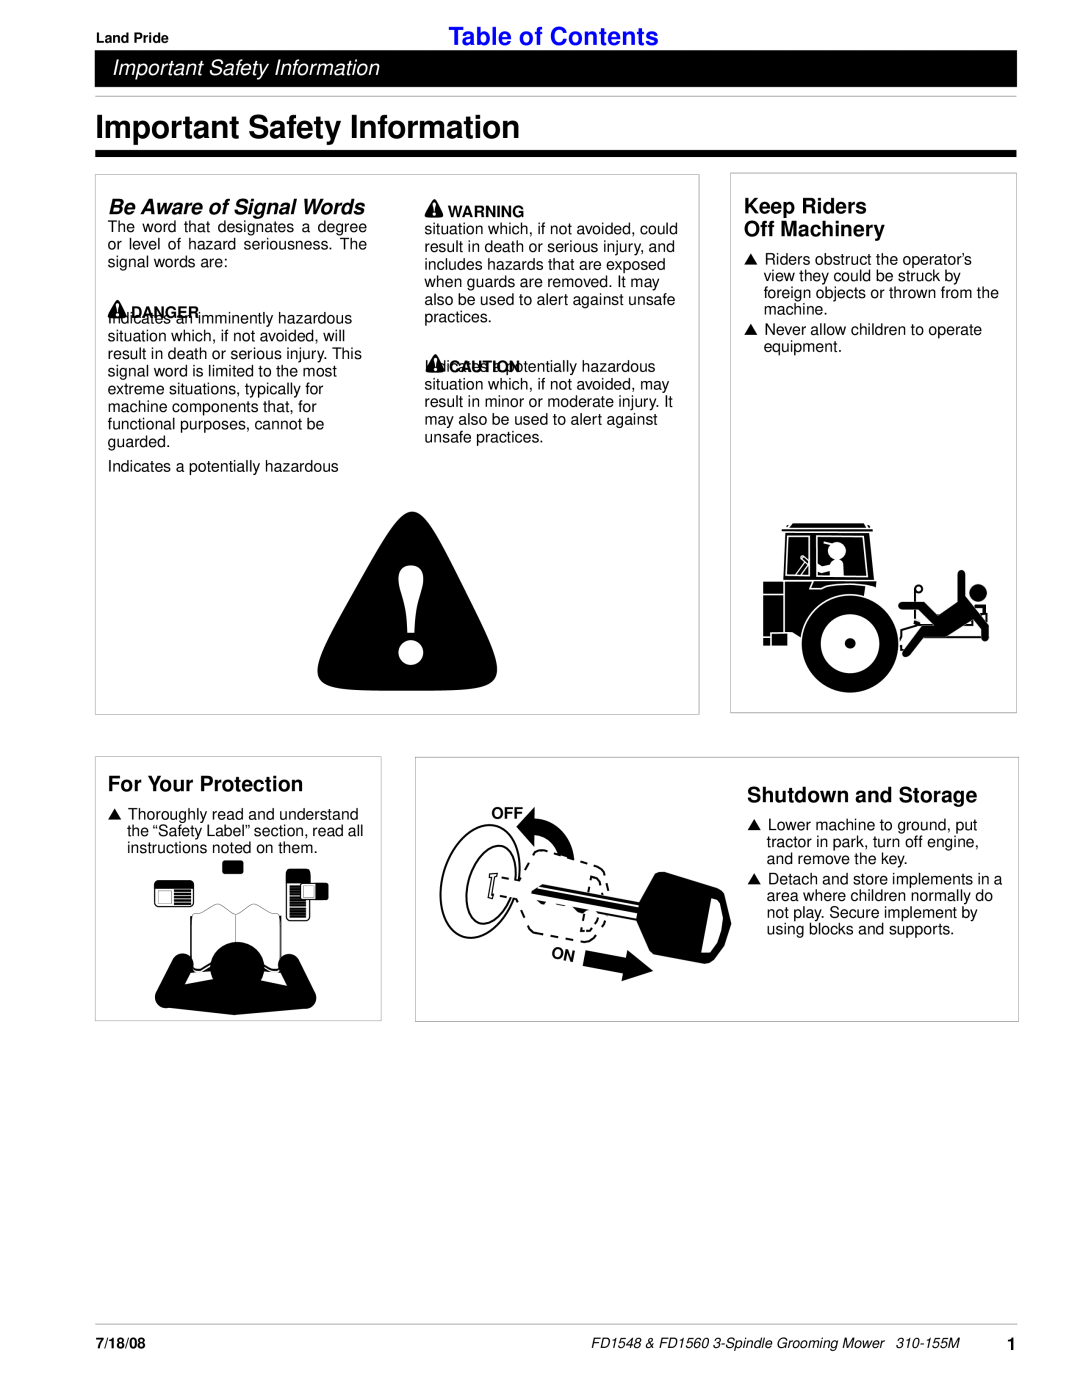 Land Pride fd1548 Important Safety Information, Table of Contents, Be Aware of Signal Words, Keep Riders Off Machinery 